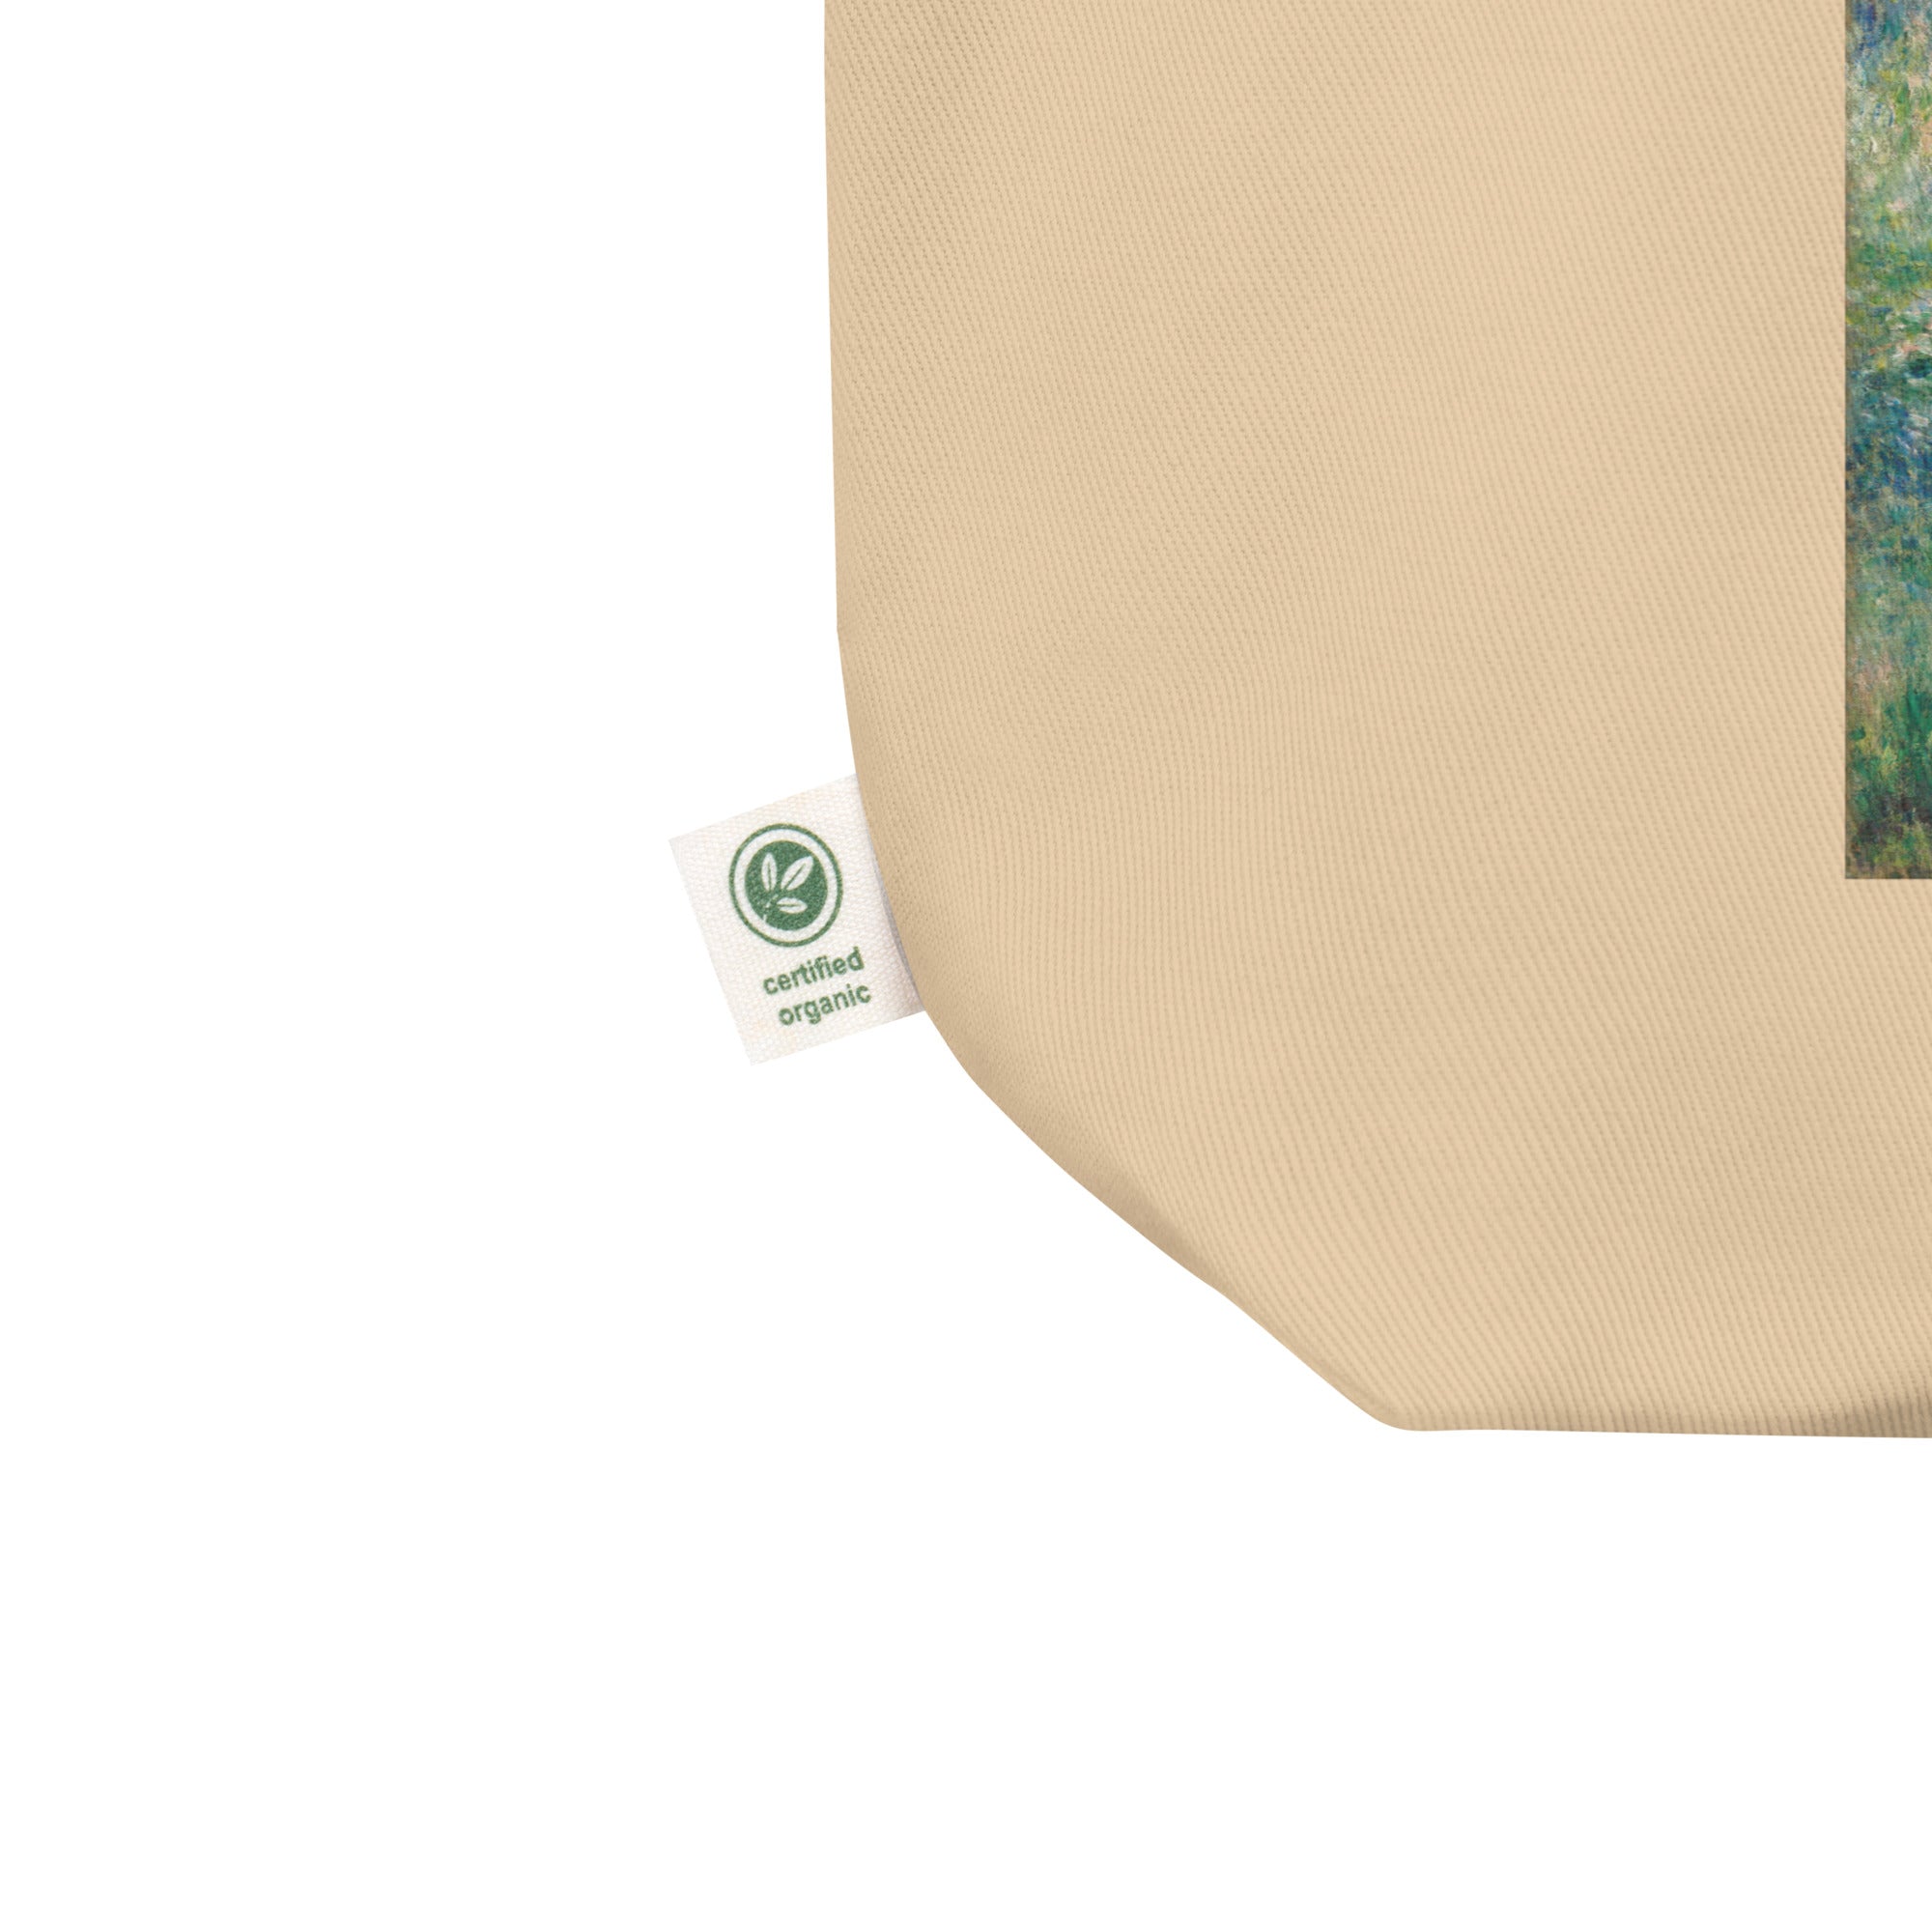 Pierre-Auguste Renoir 'Path in the Forest' Famous Painting Totebag | Eco Friendly Art Tote Bag